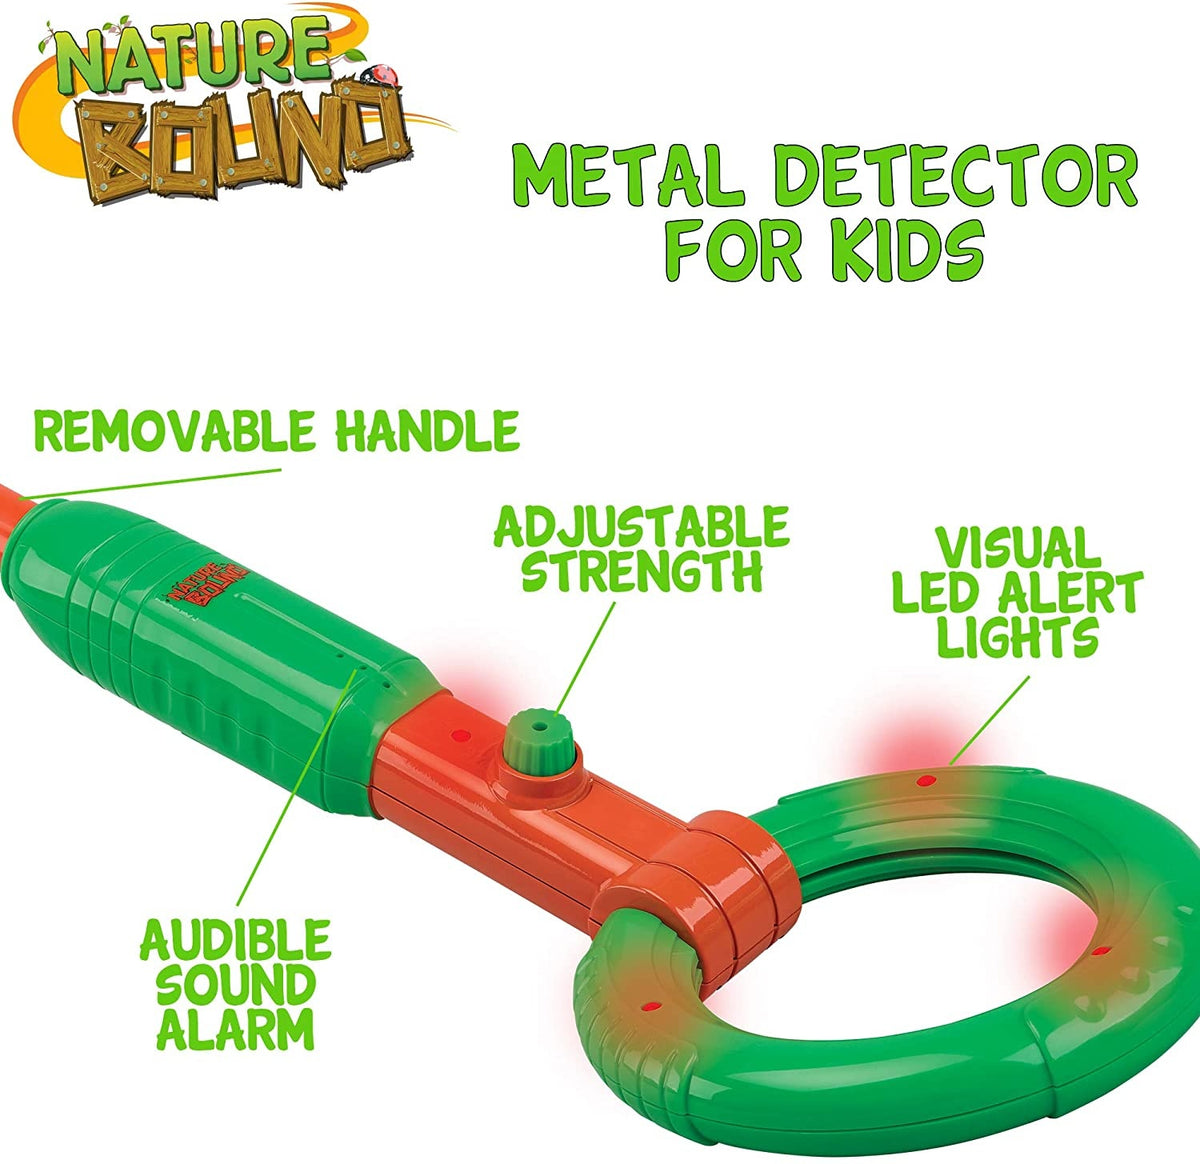 Metal Detector for Kids Cover